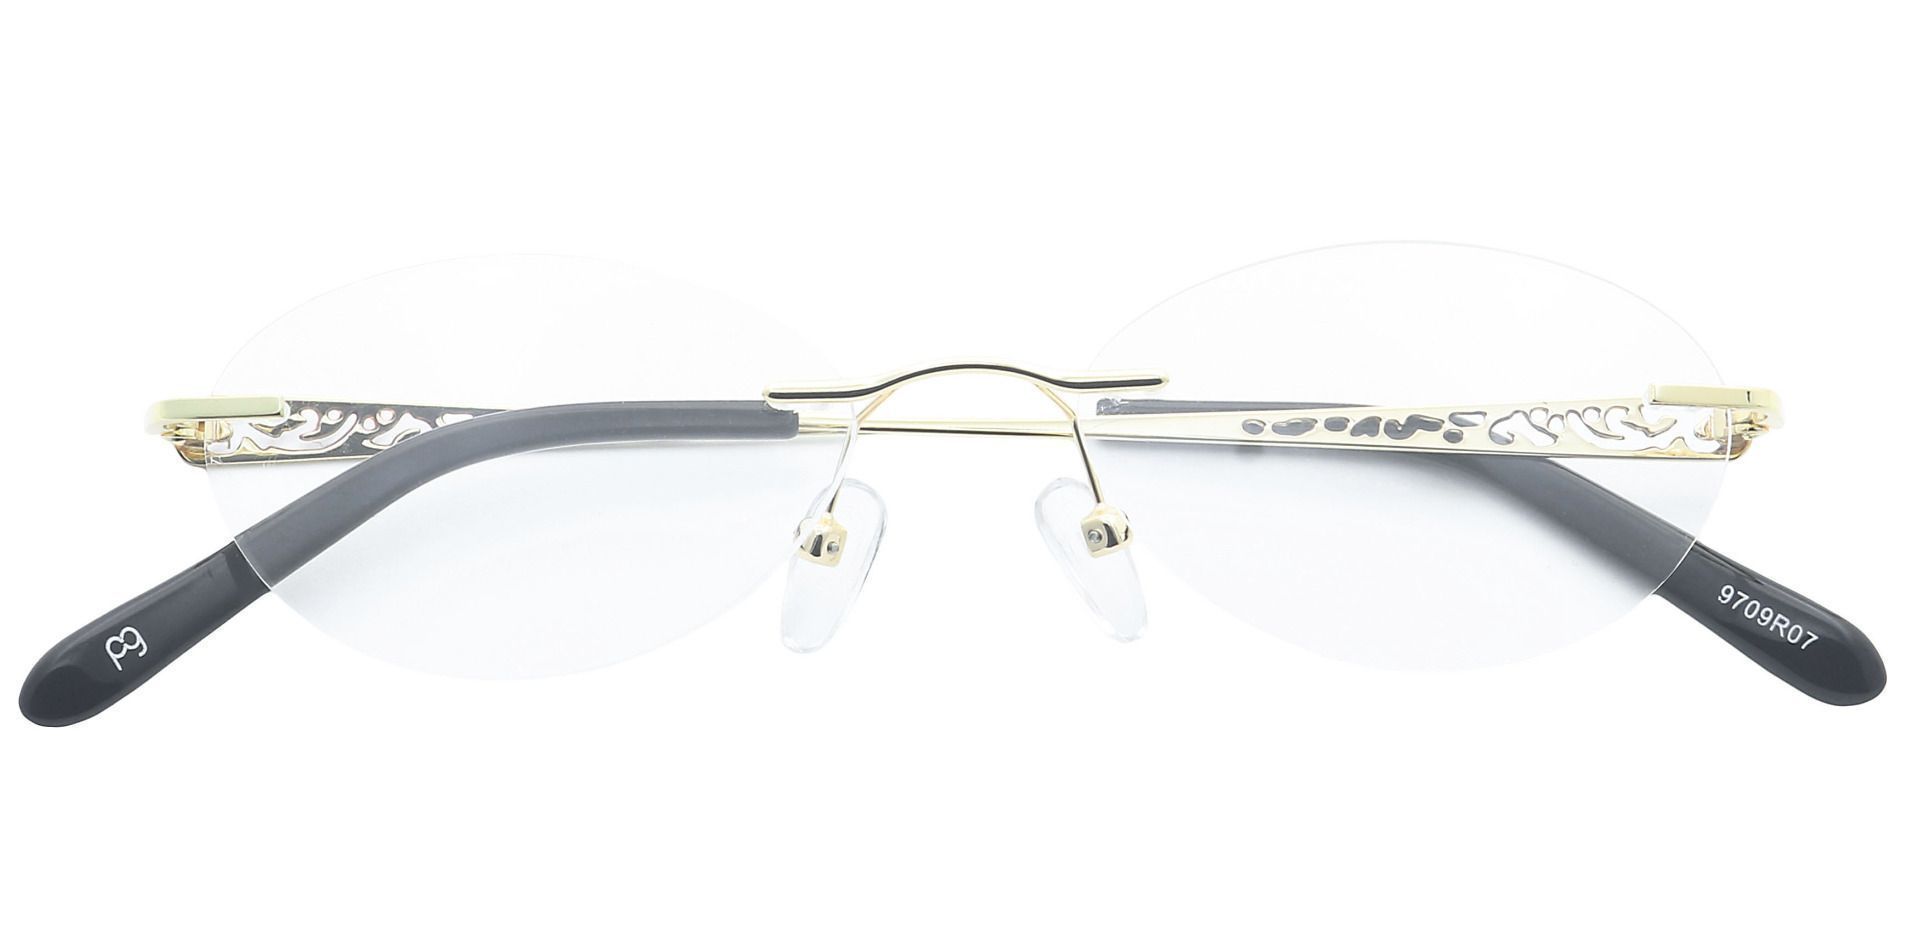 Christina Rimless Non-Rx Glasses - The Frame Is Yellow And Red